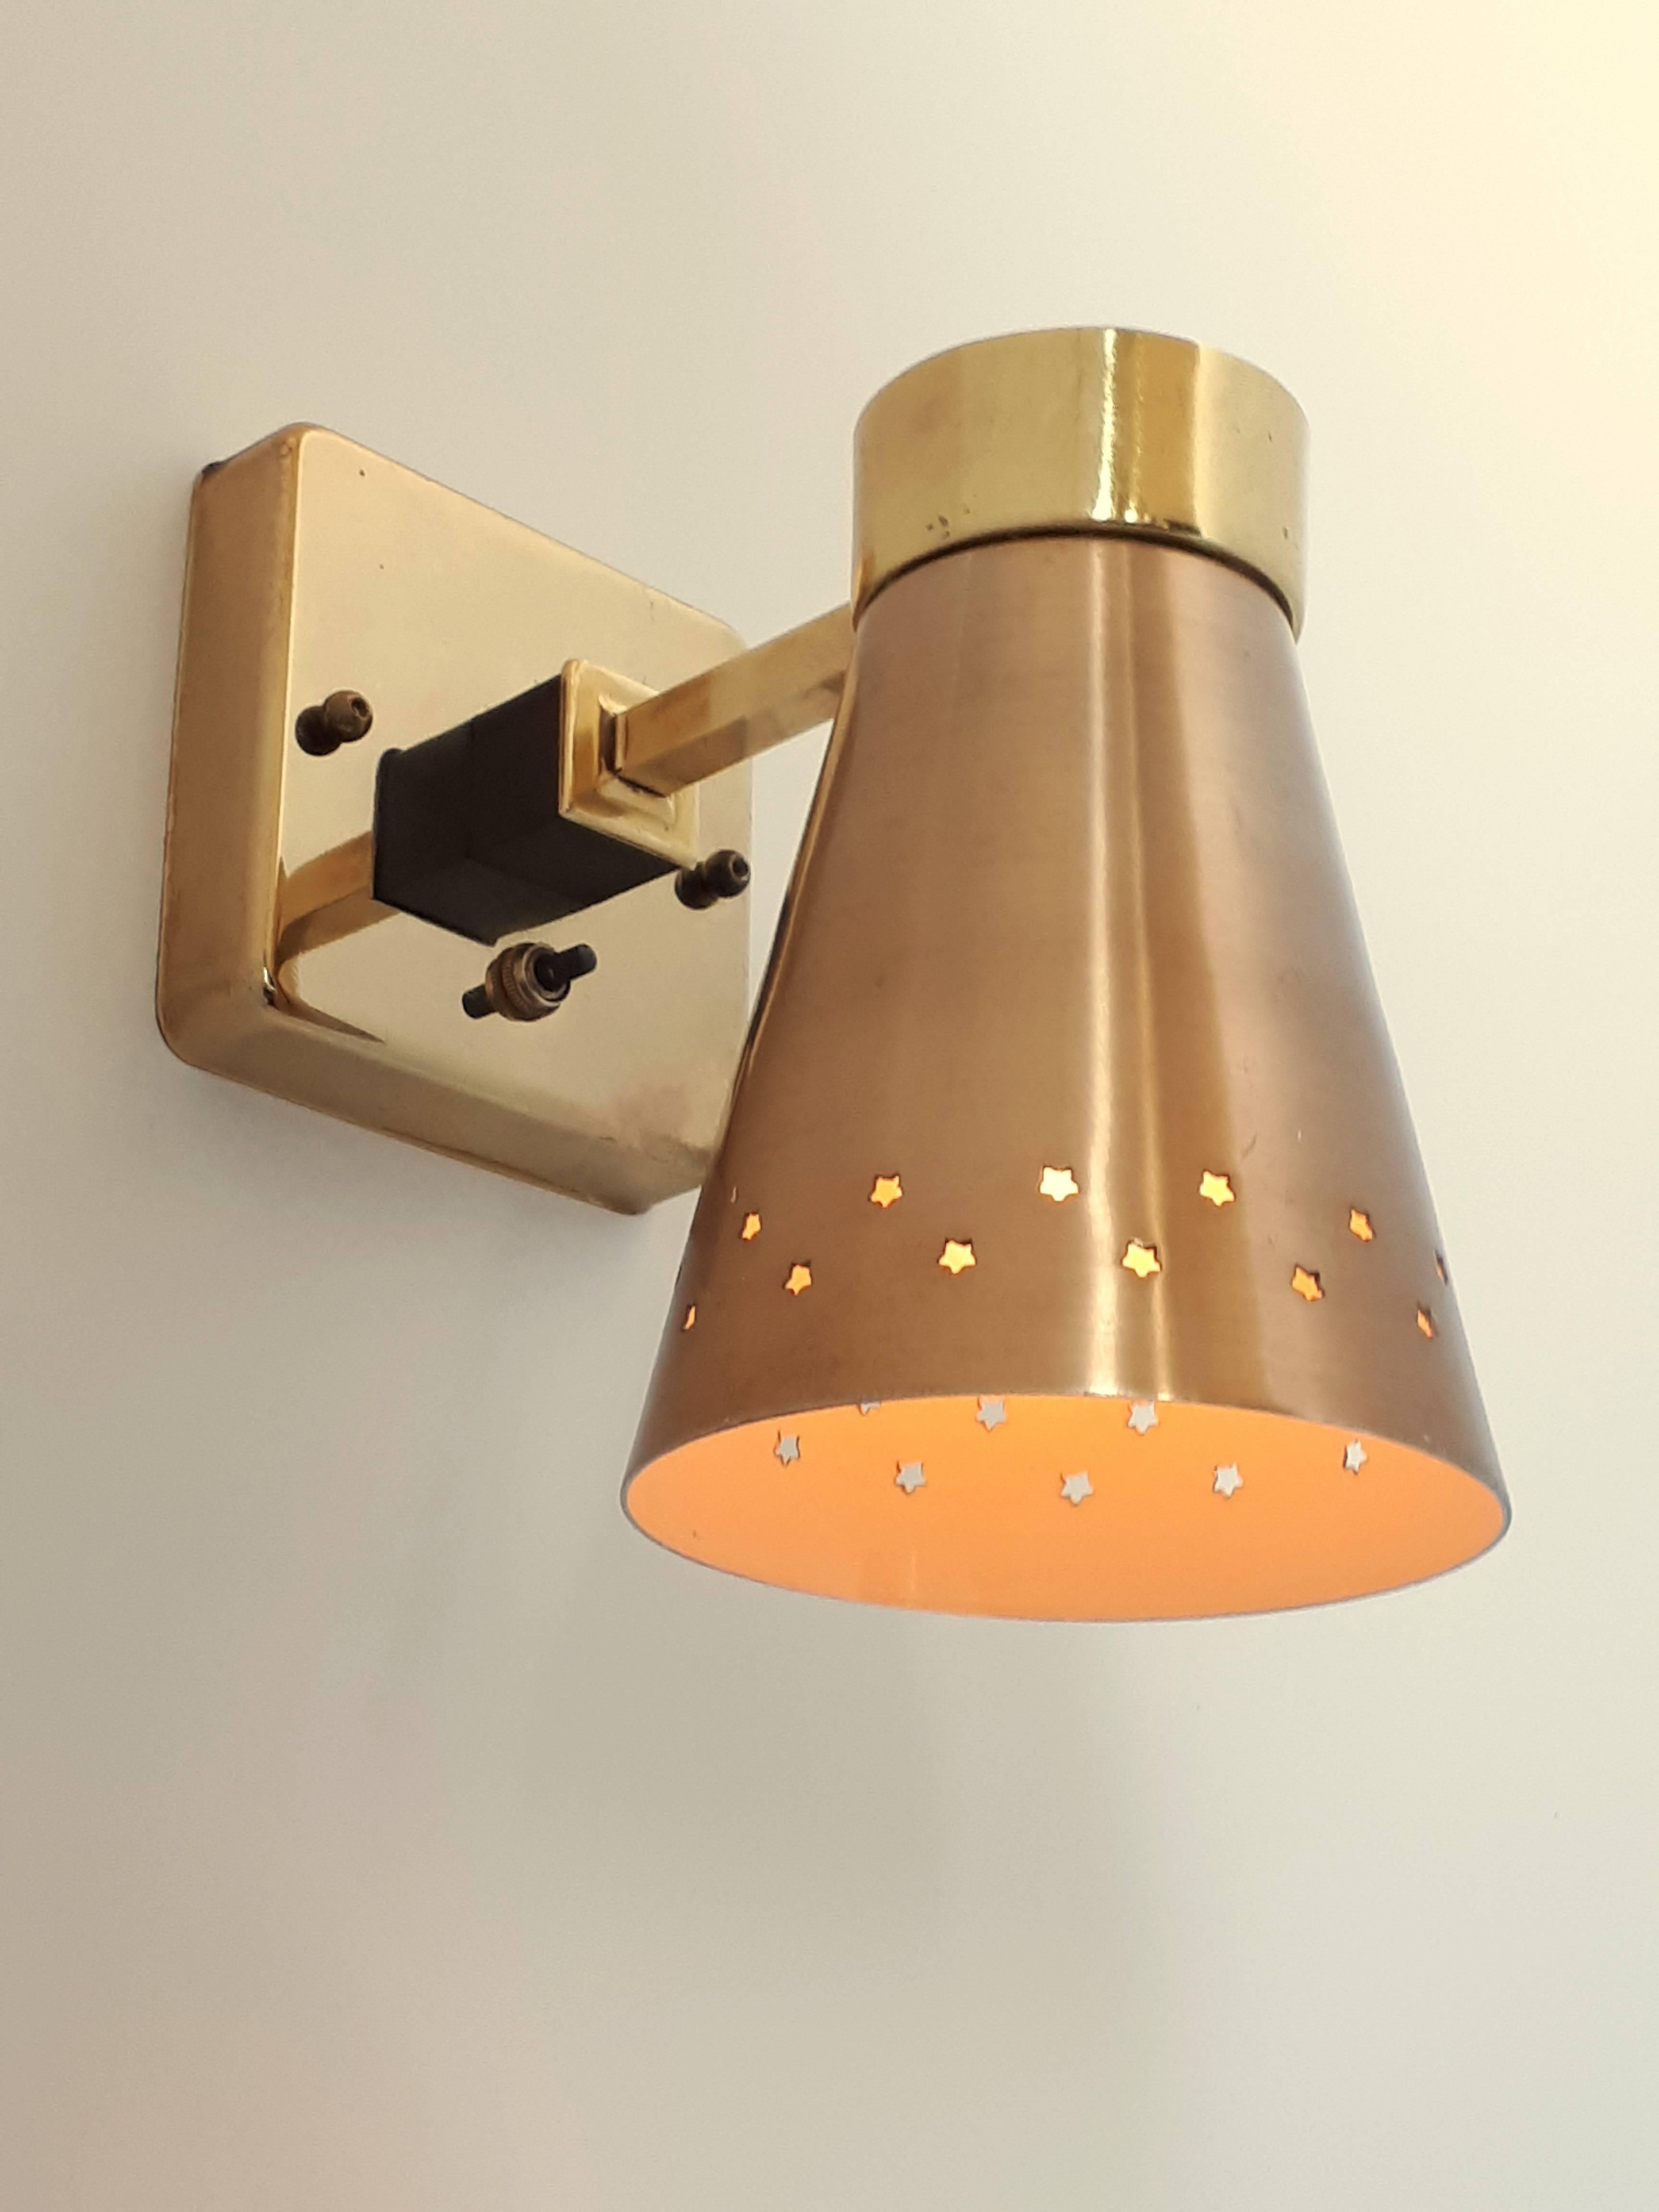 3 sconces available.

Star motif pierced shade in a copper tone. 

Base and arm are brass-plated. 

Rotating switch on base. 

Contain one E26 regular ceramic socket rated at 60 watt. 

Could sell per unit.

 